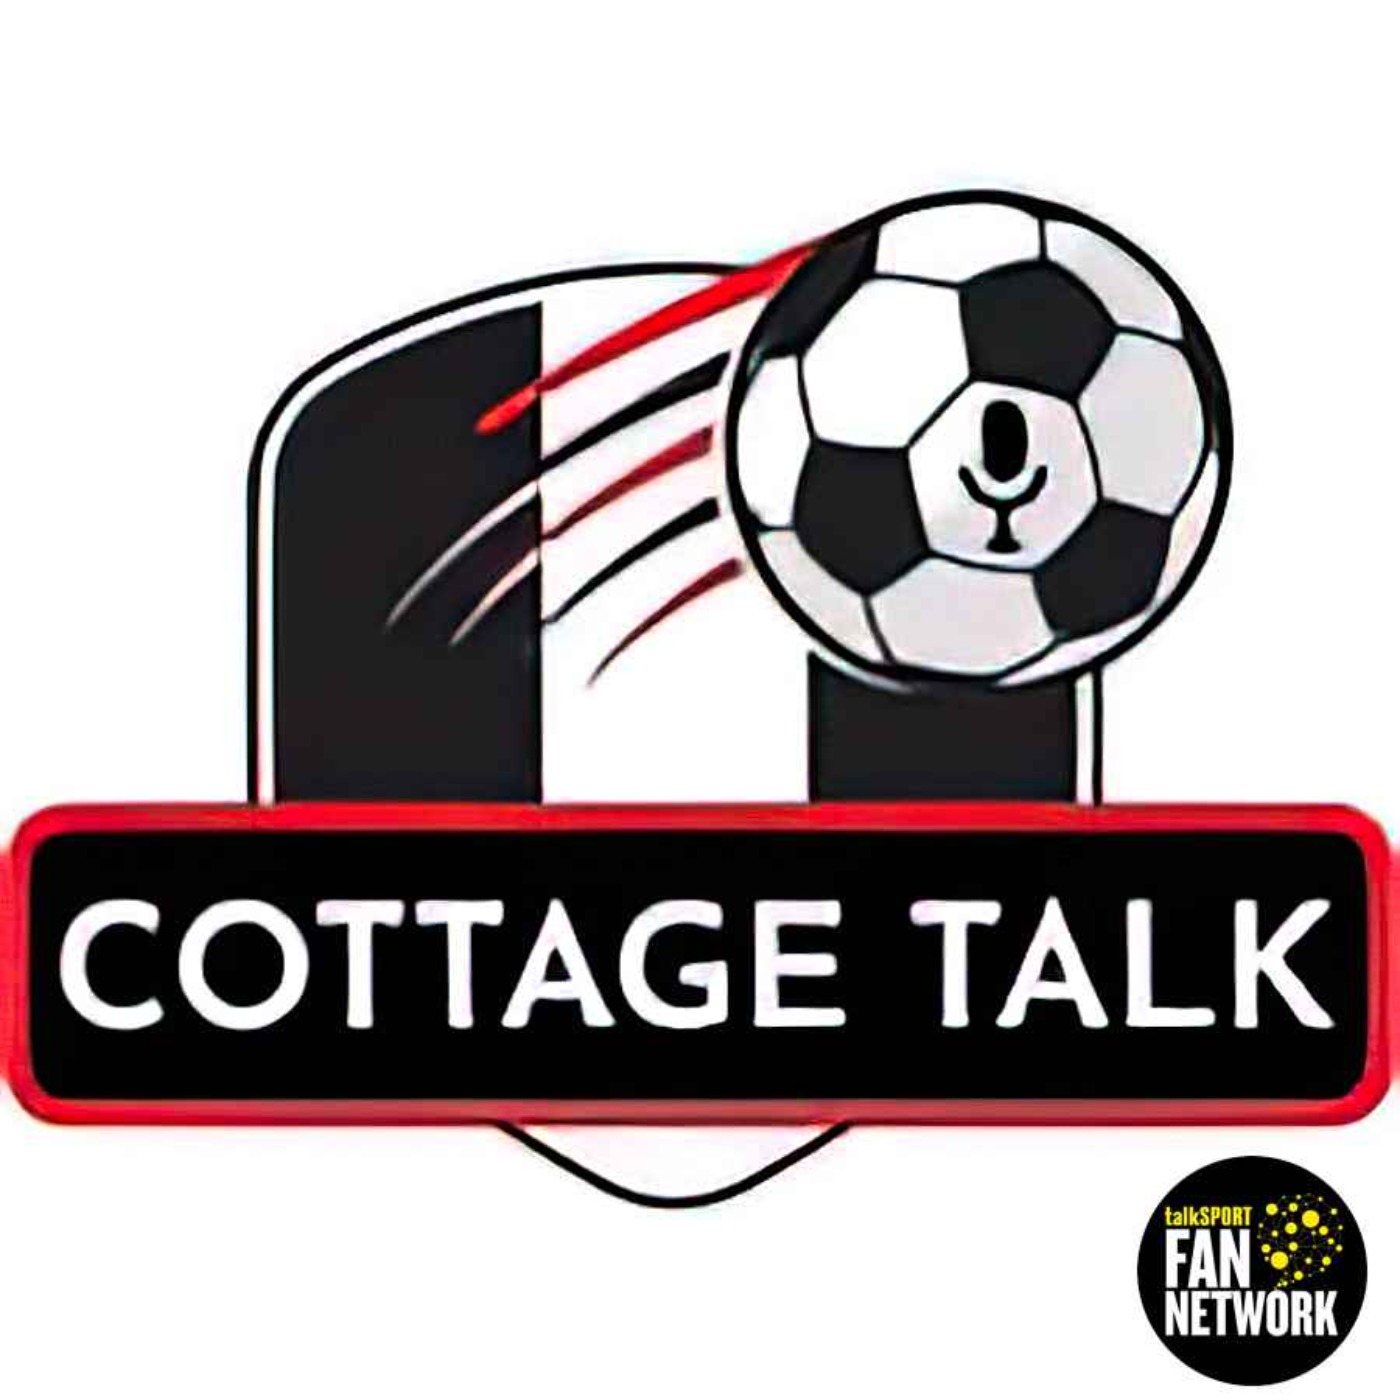 Cottage Talk Preview Show: Five Keys To Victory For Fulham Against Wolves